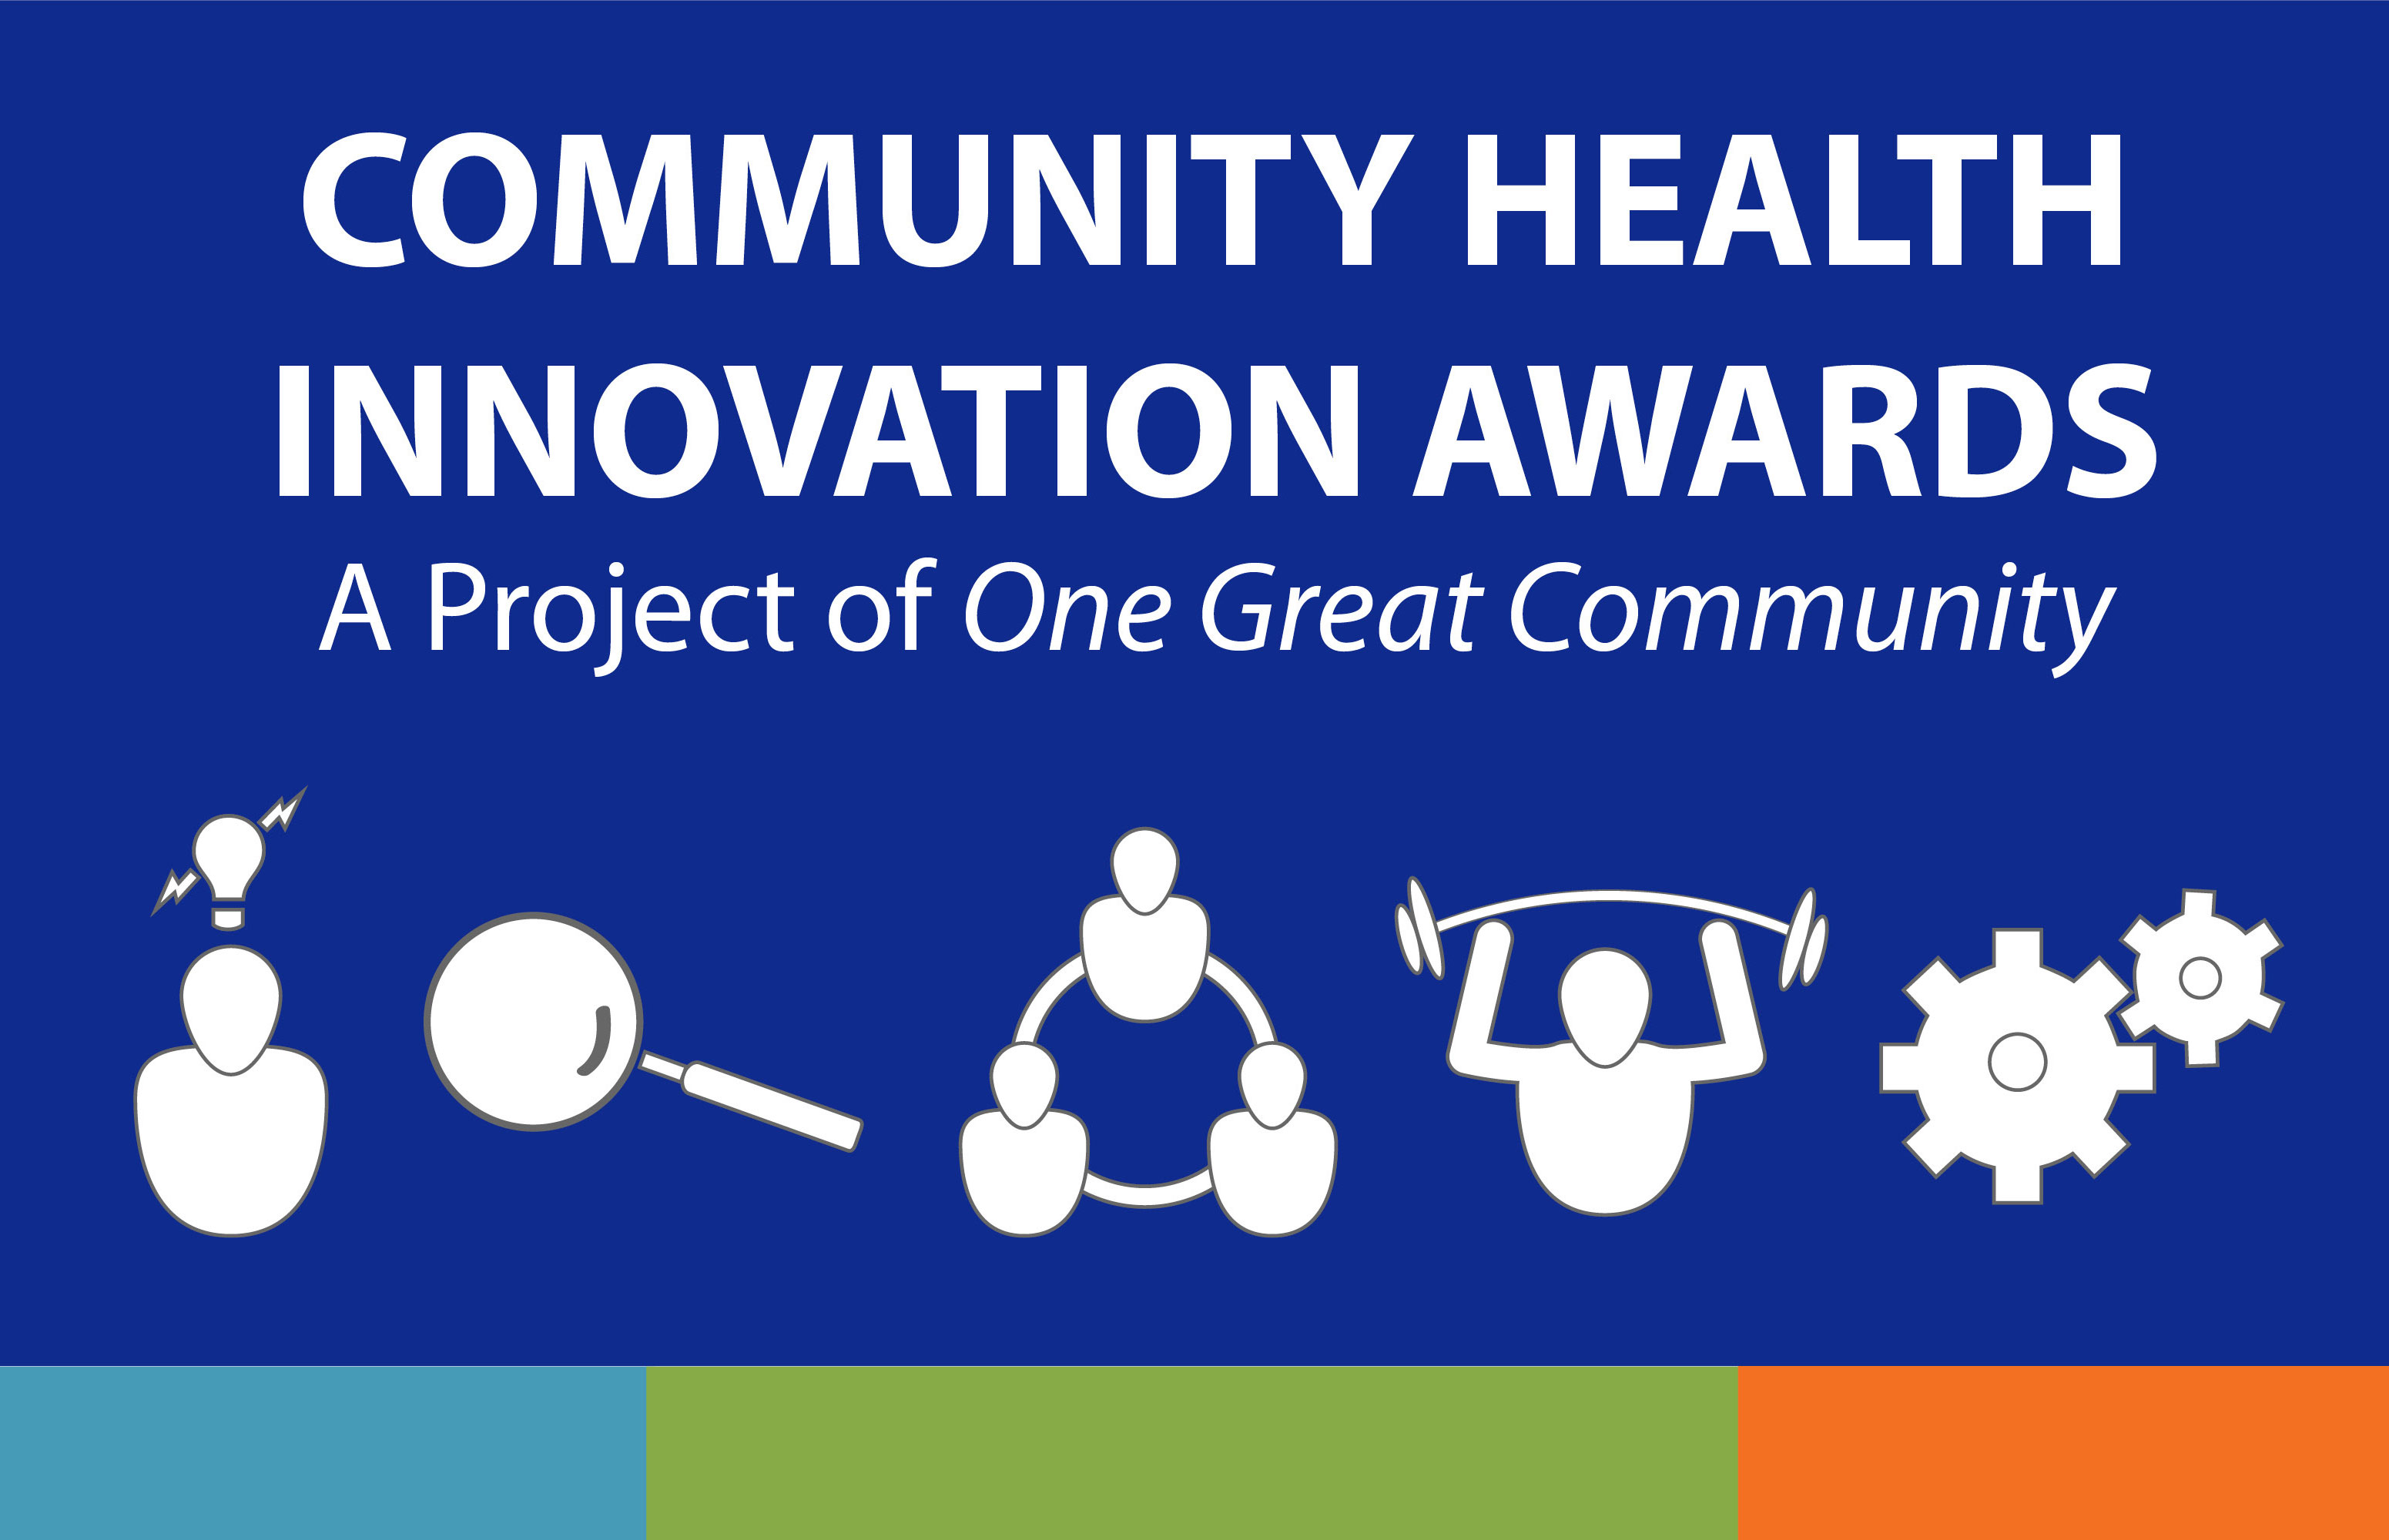 Community Health Innovation Awards Center for Clinical and